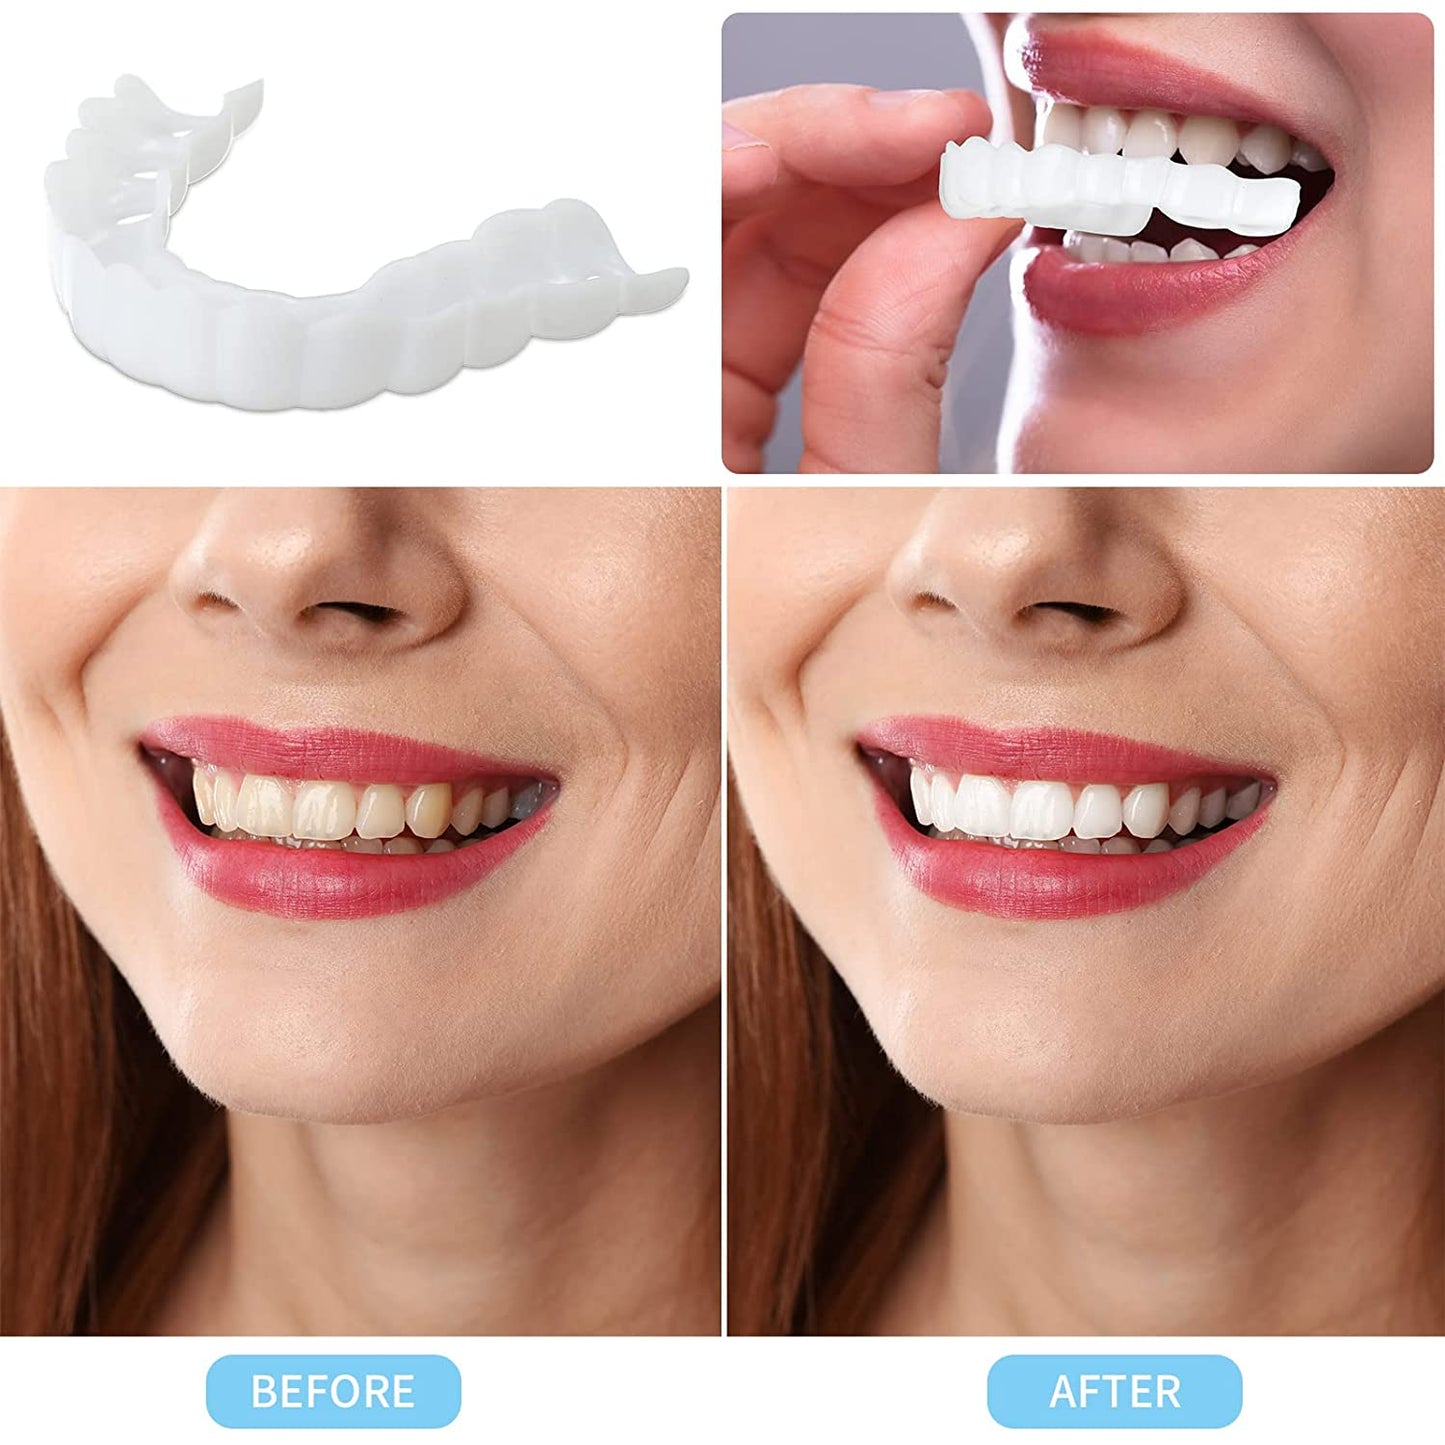 Happy Smile (Adjustable Size - Fits for All)